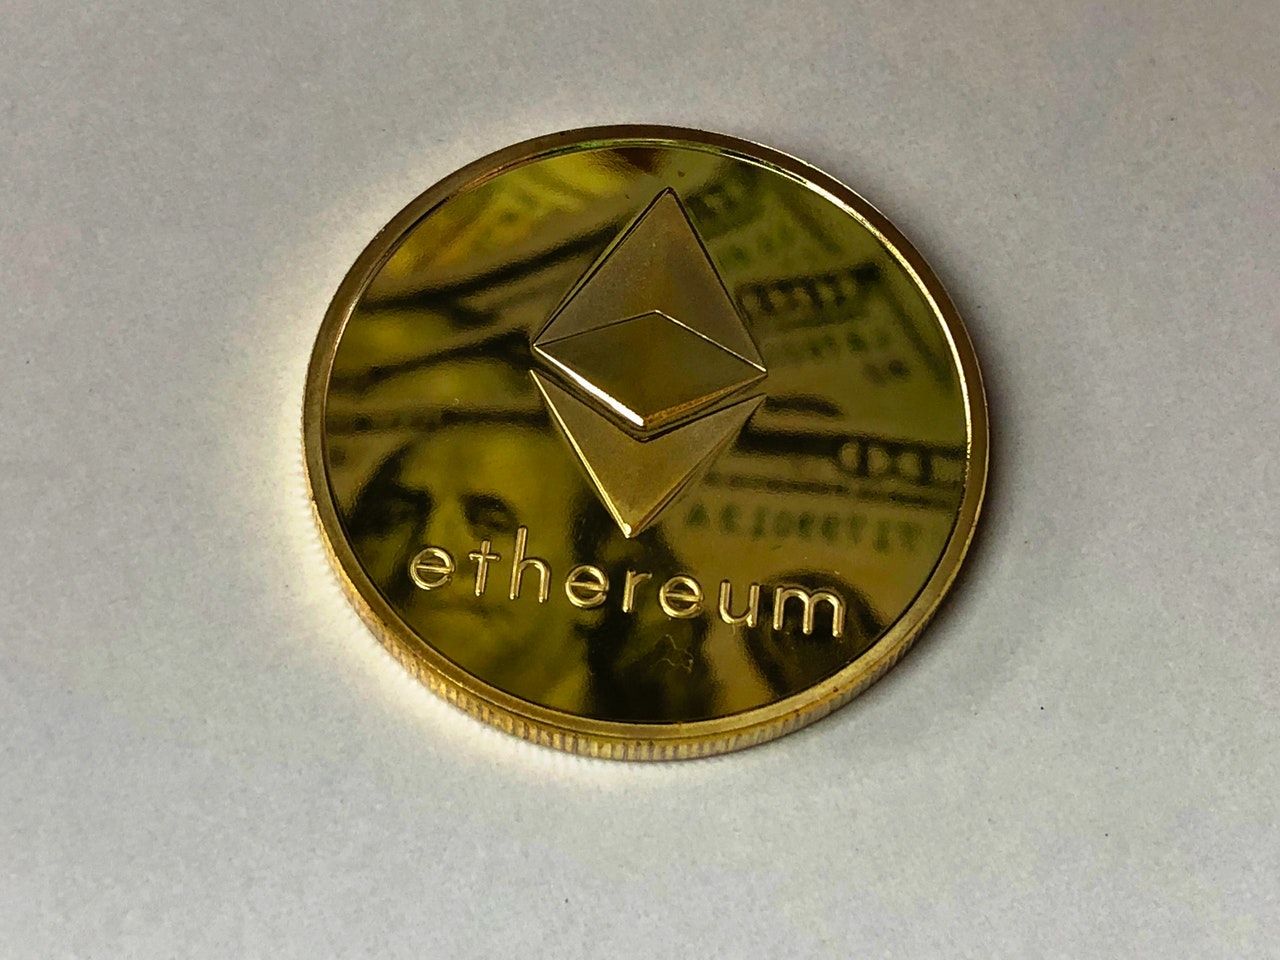 Stock image photo of altcoin Ethereum